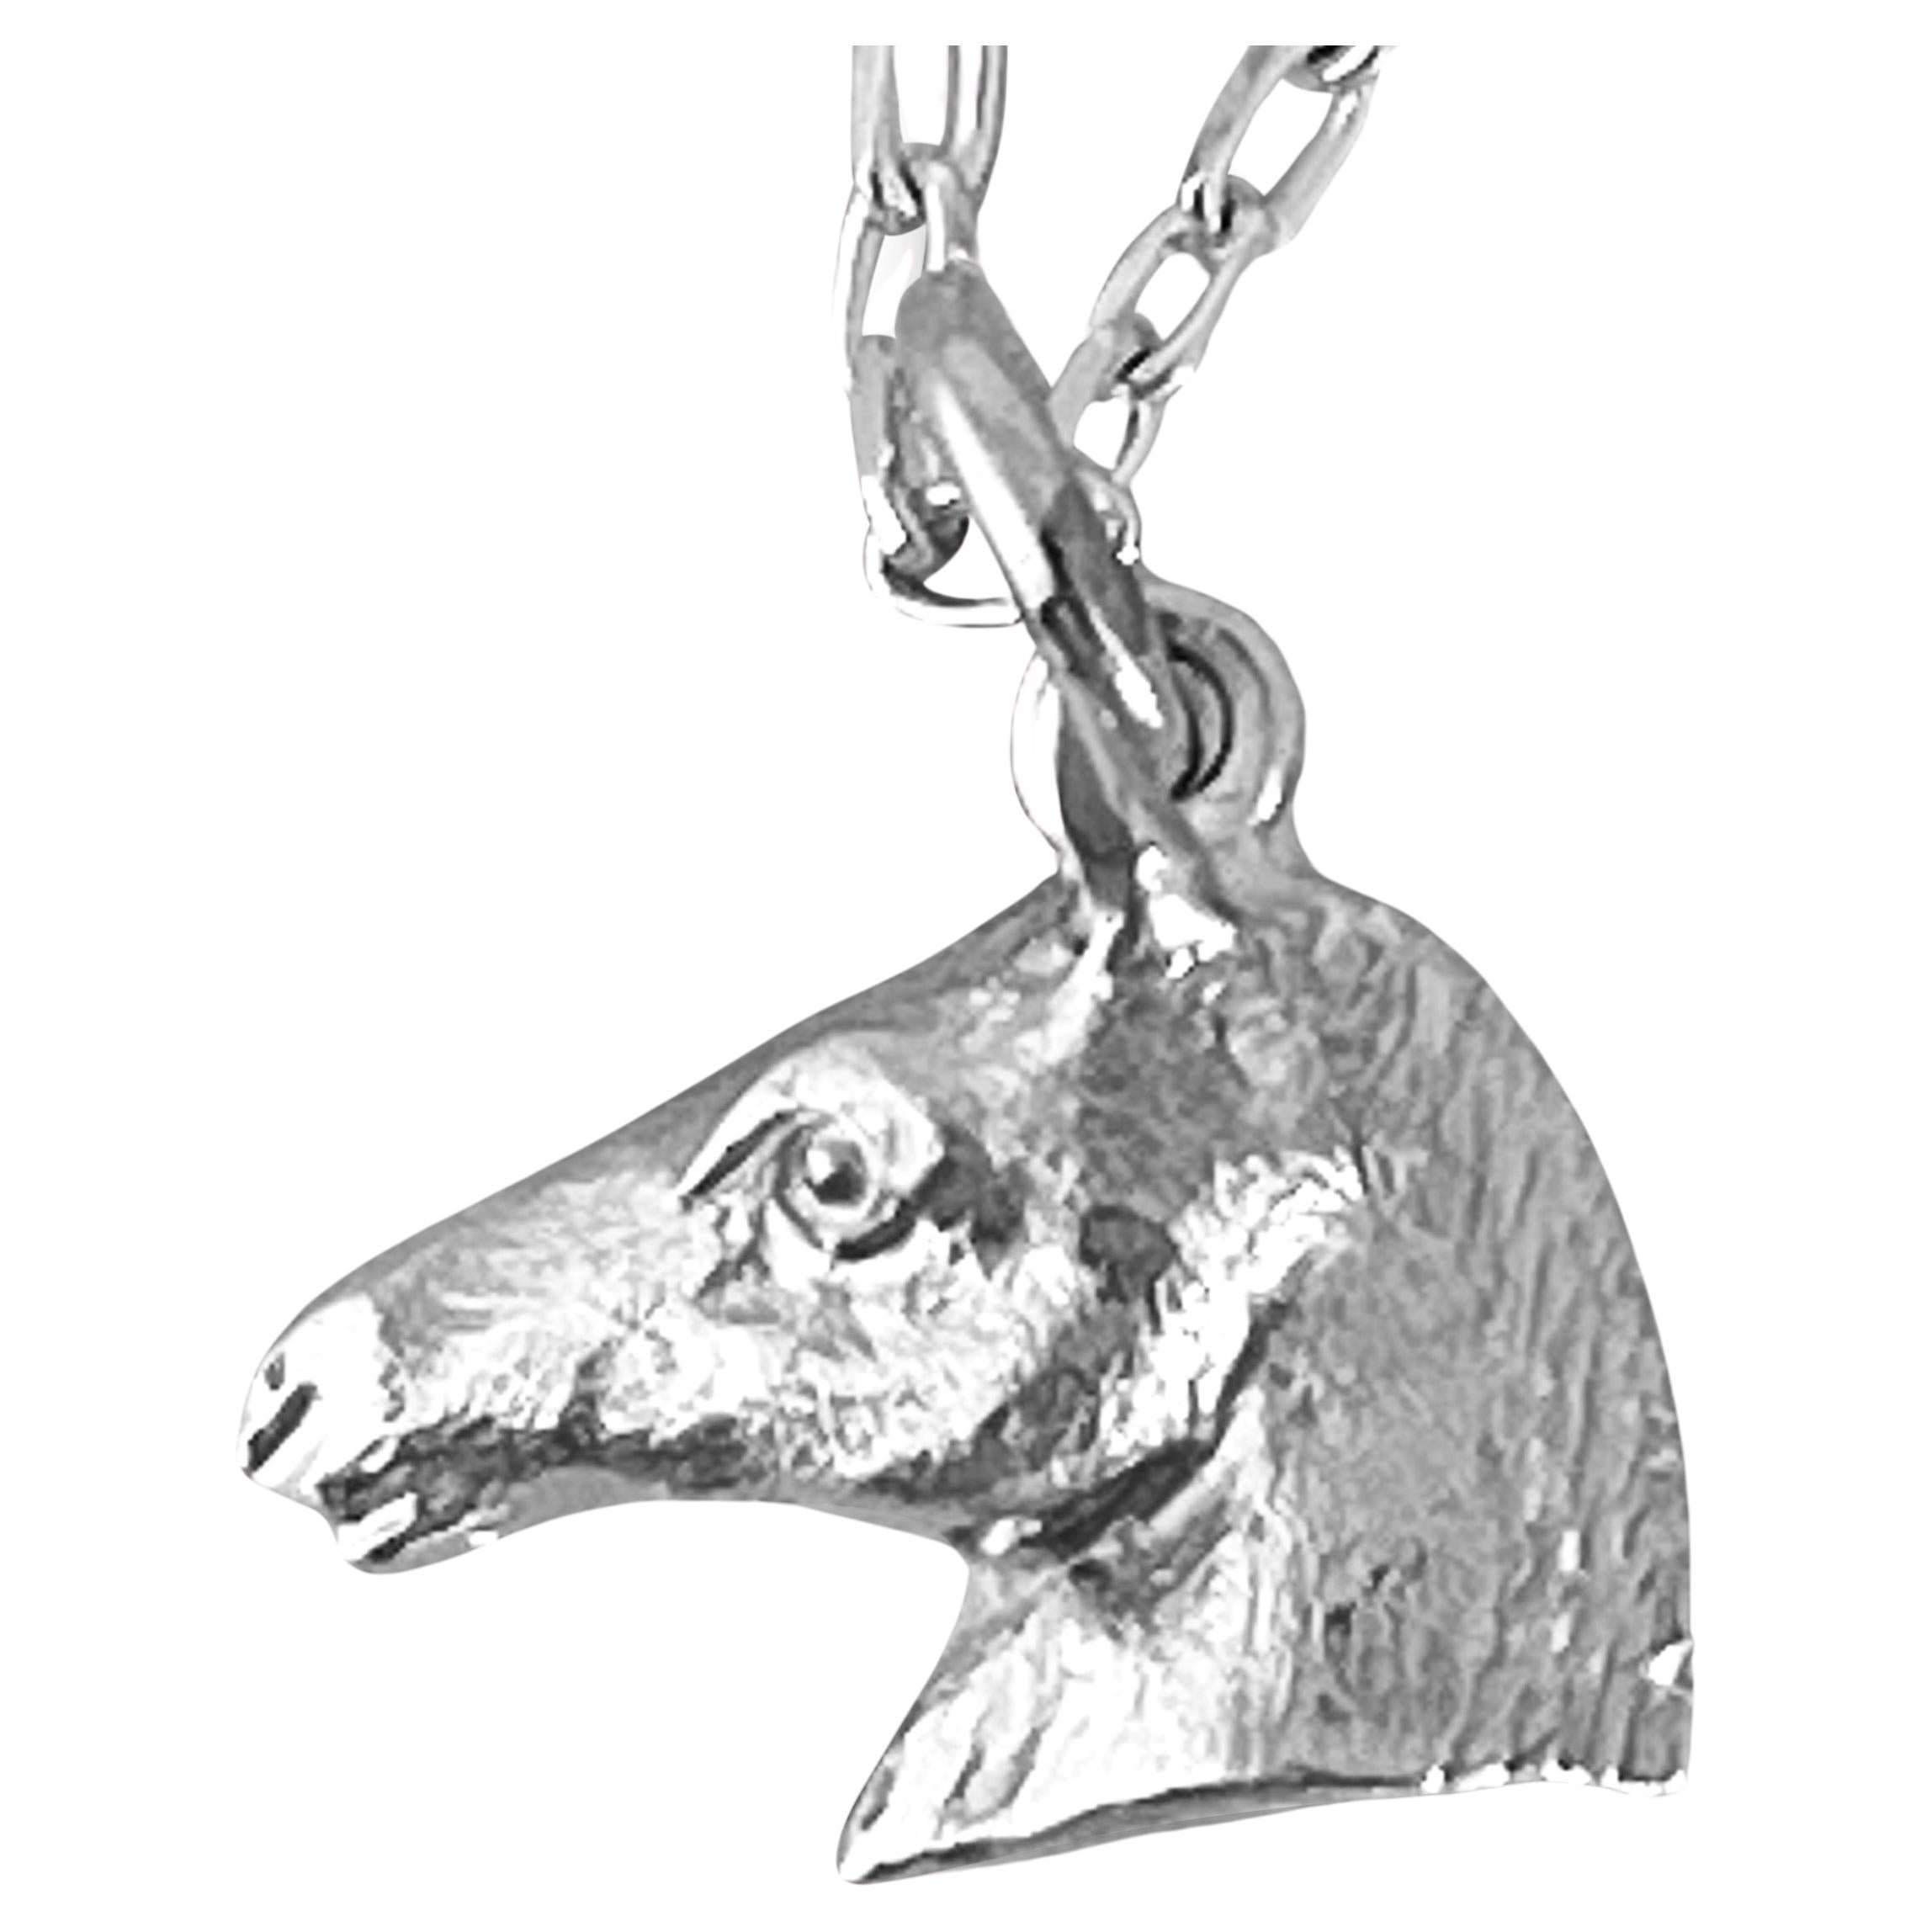 Paul Eaton Sculpted Miniature Horse Head in a Sterling Silver Charm or Pendant 